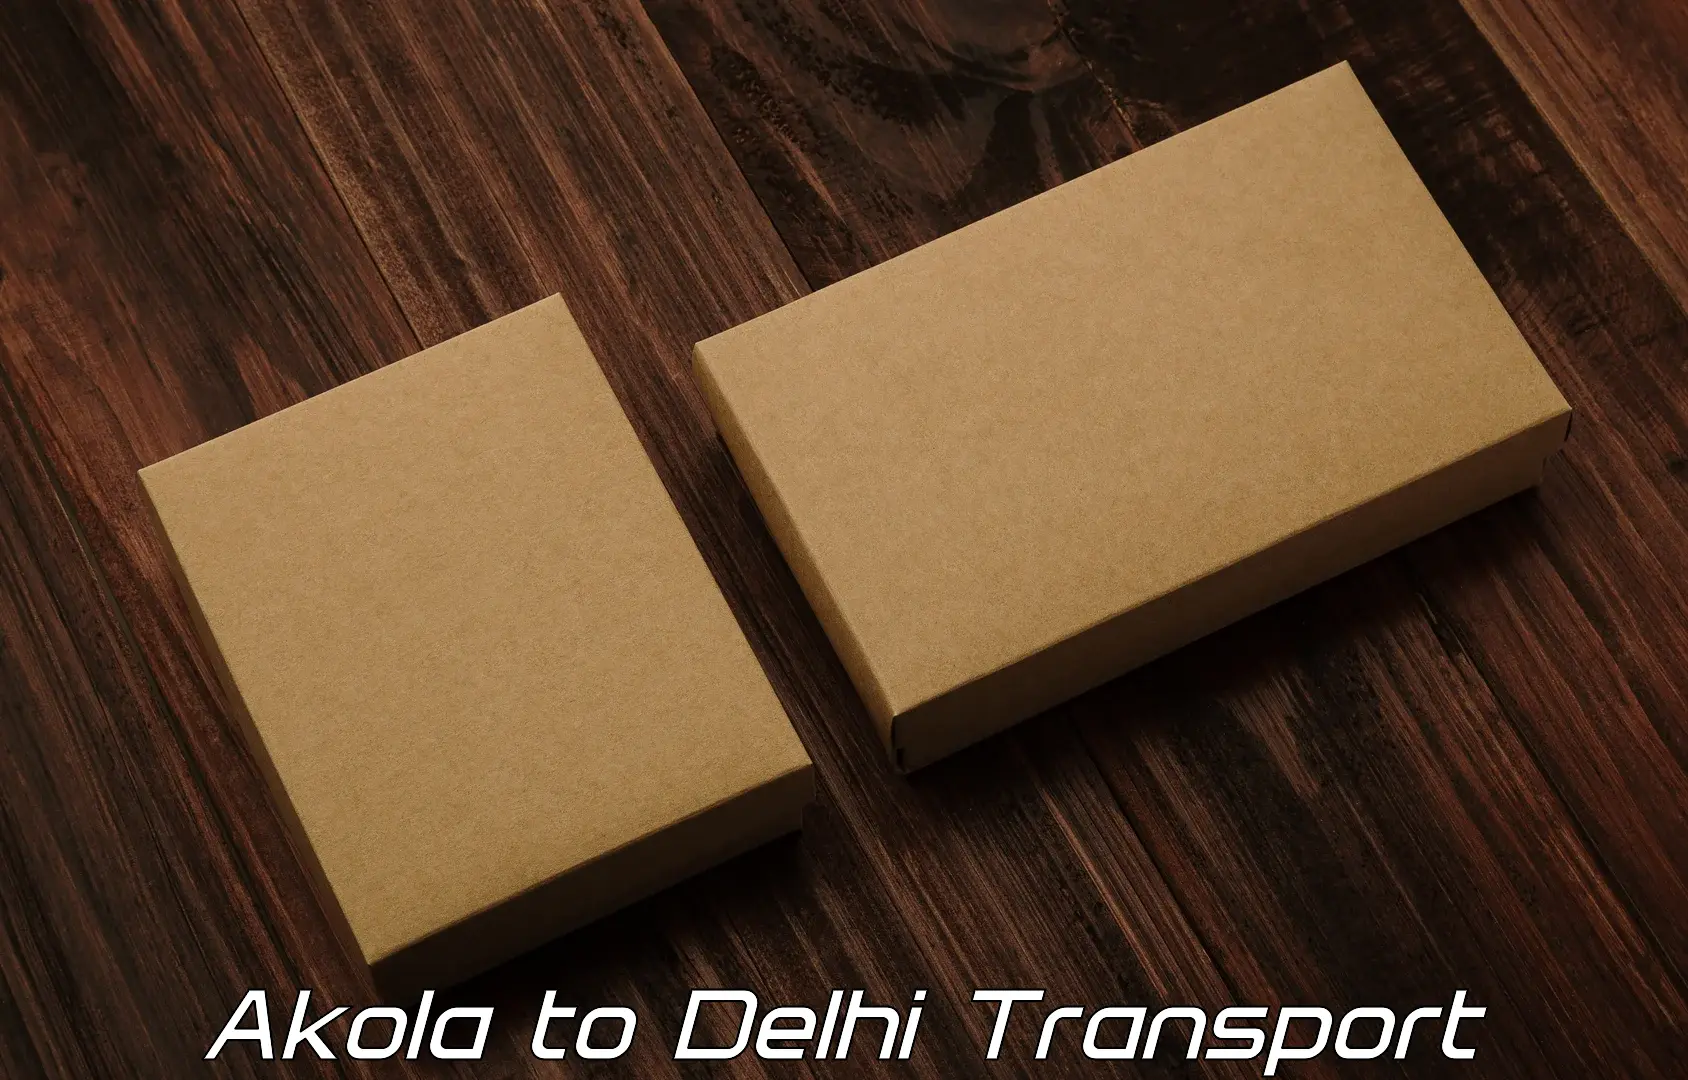 Transport bike from one state to another Akola to University of Delhi